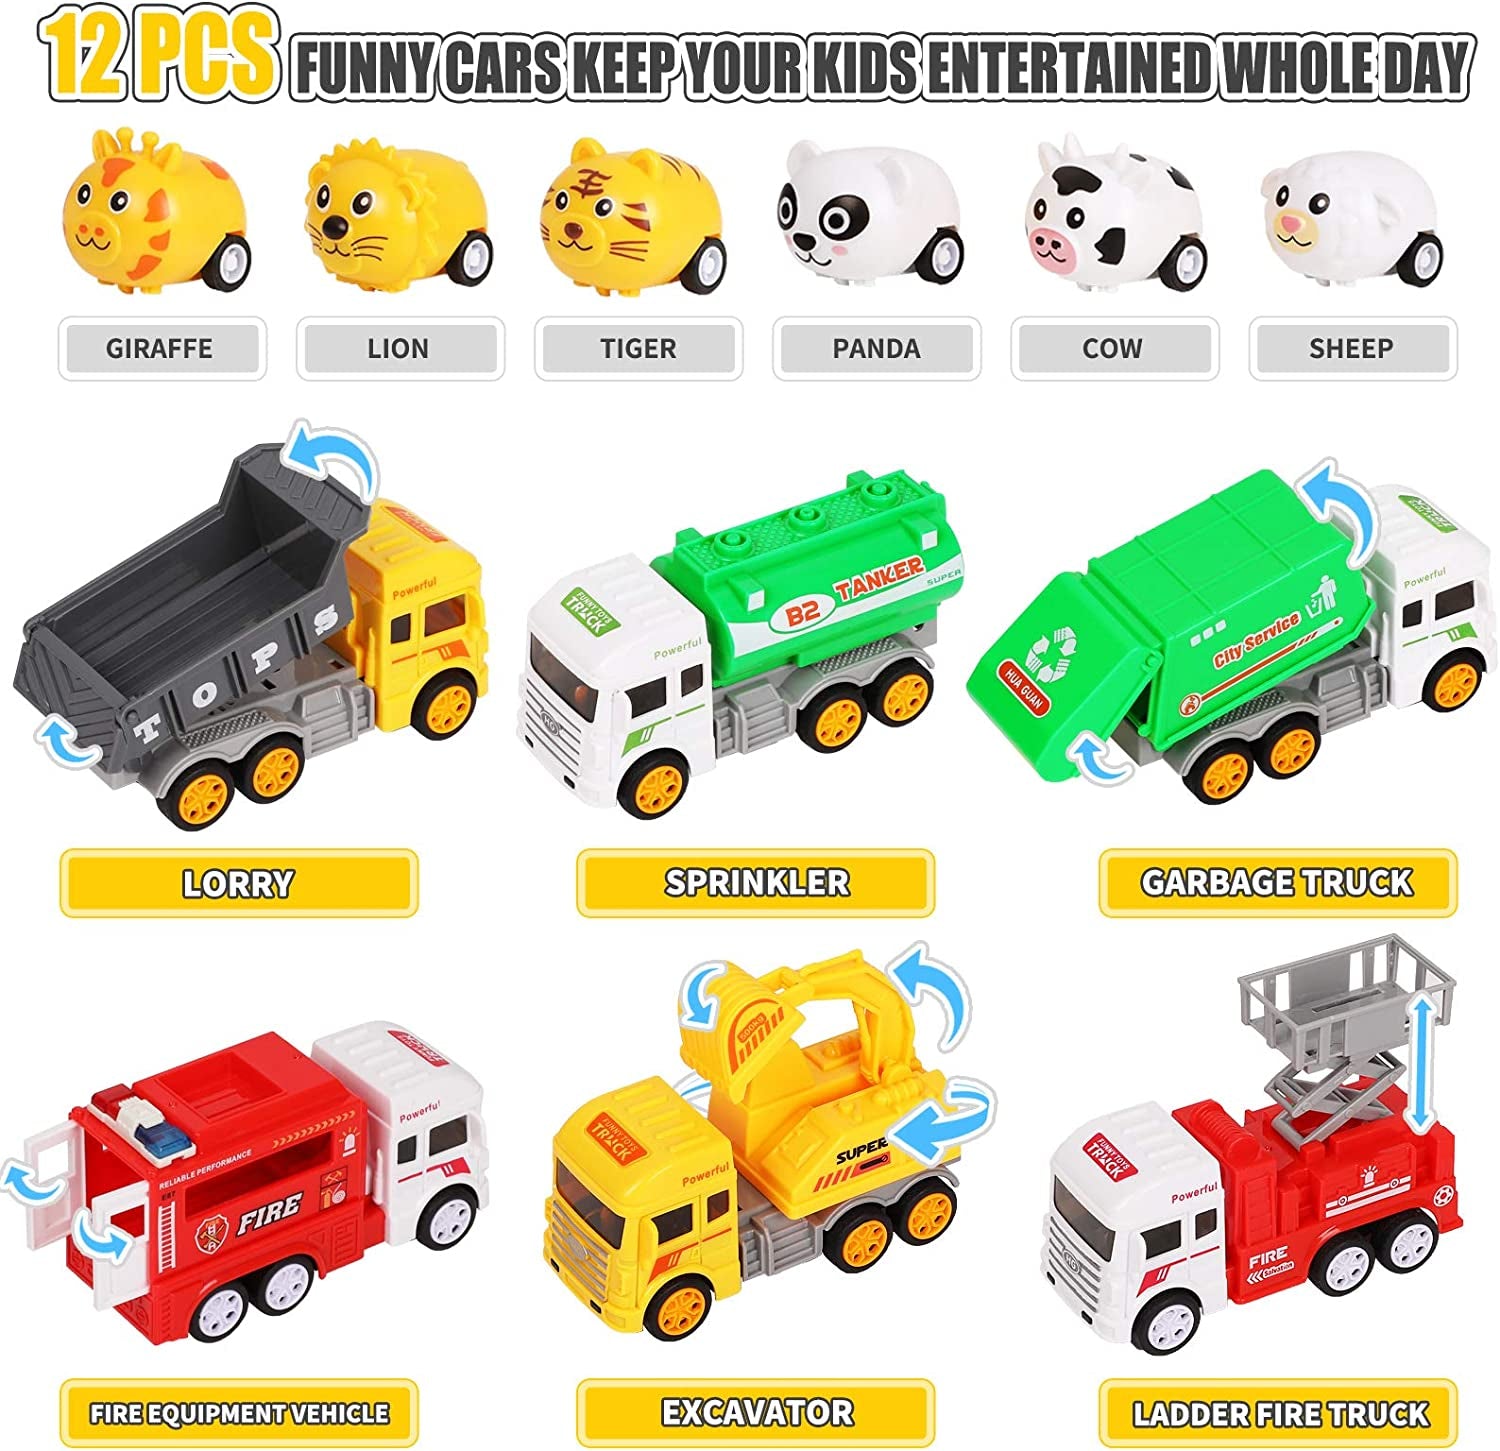 Toy Trucks with Play Mat for Boys, Construction Vehicle and Mini Animal Cars with Road Signs, Crane, Playmat and Storage Box for Kids Toddlers Age 3 4 5 6 7 Year Christmas Birthday Gift